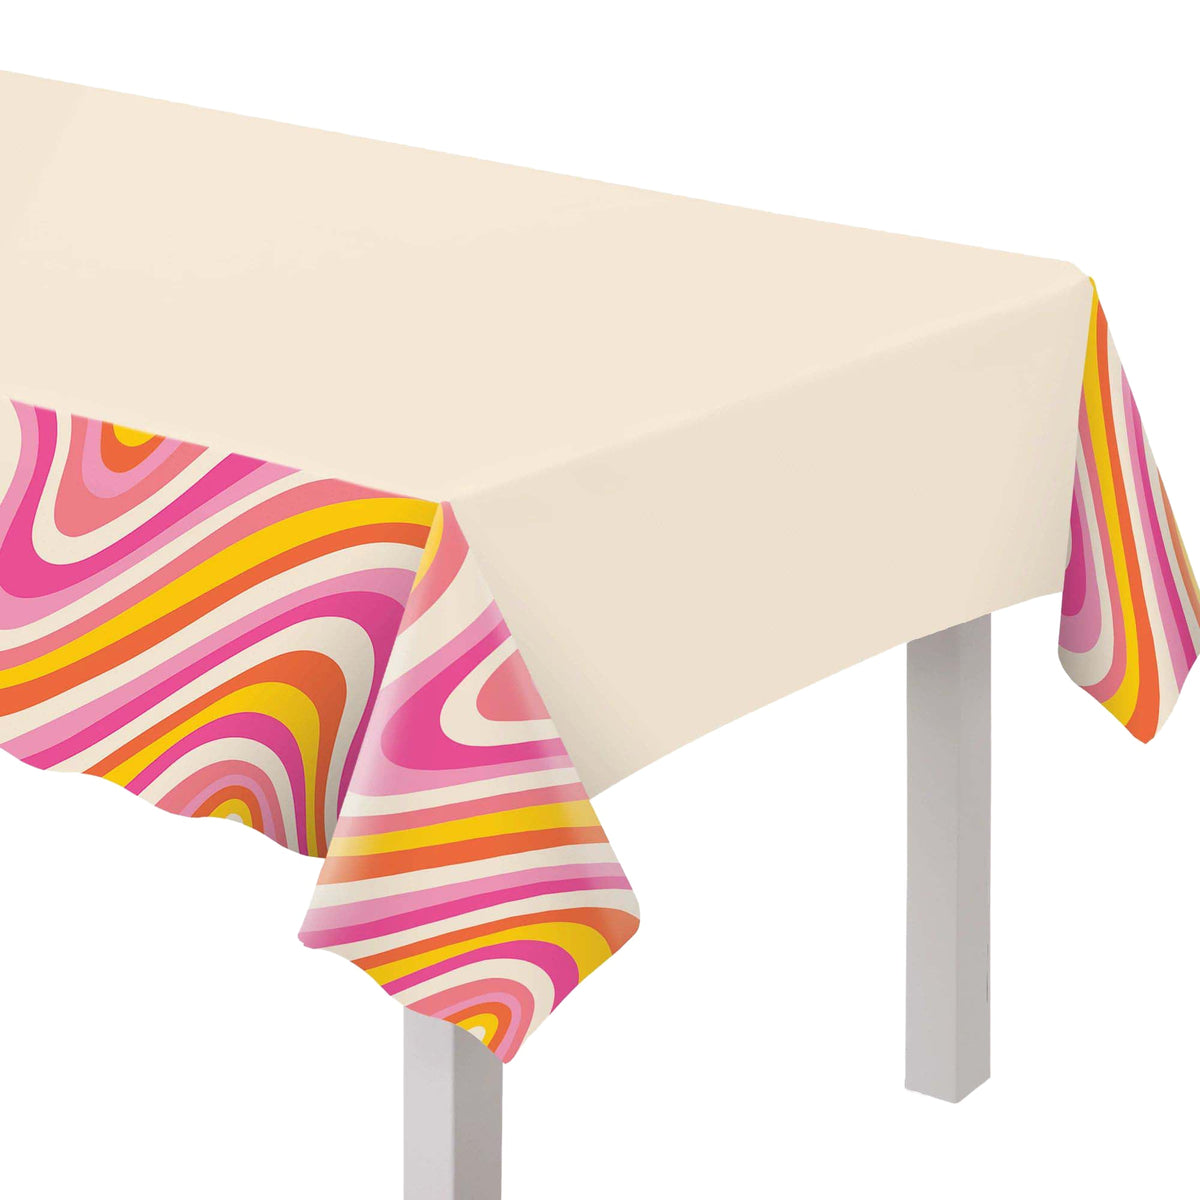 AMSCAN CA Summer Throwback Summer Rectangular Plastic Table Cover, 54 x 102 Inches, 1 Count